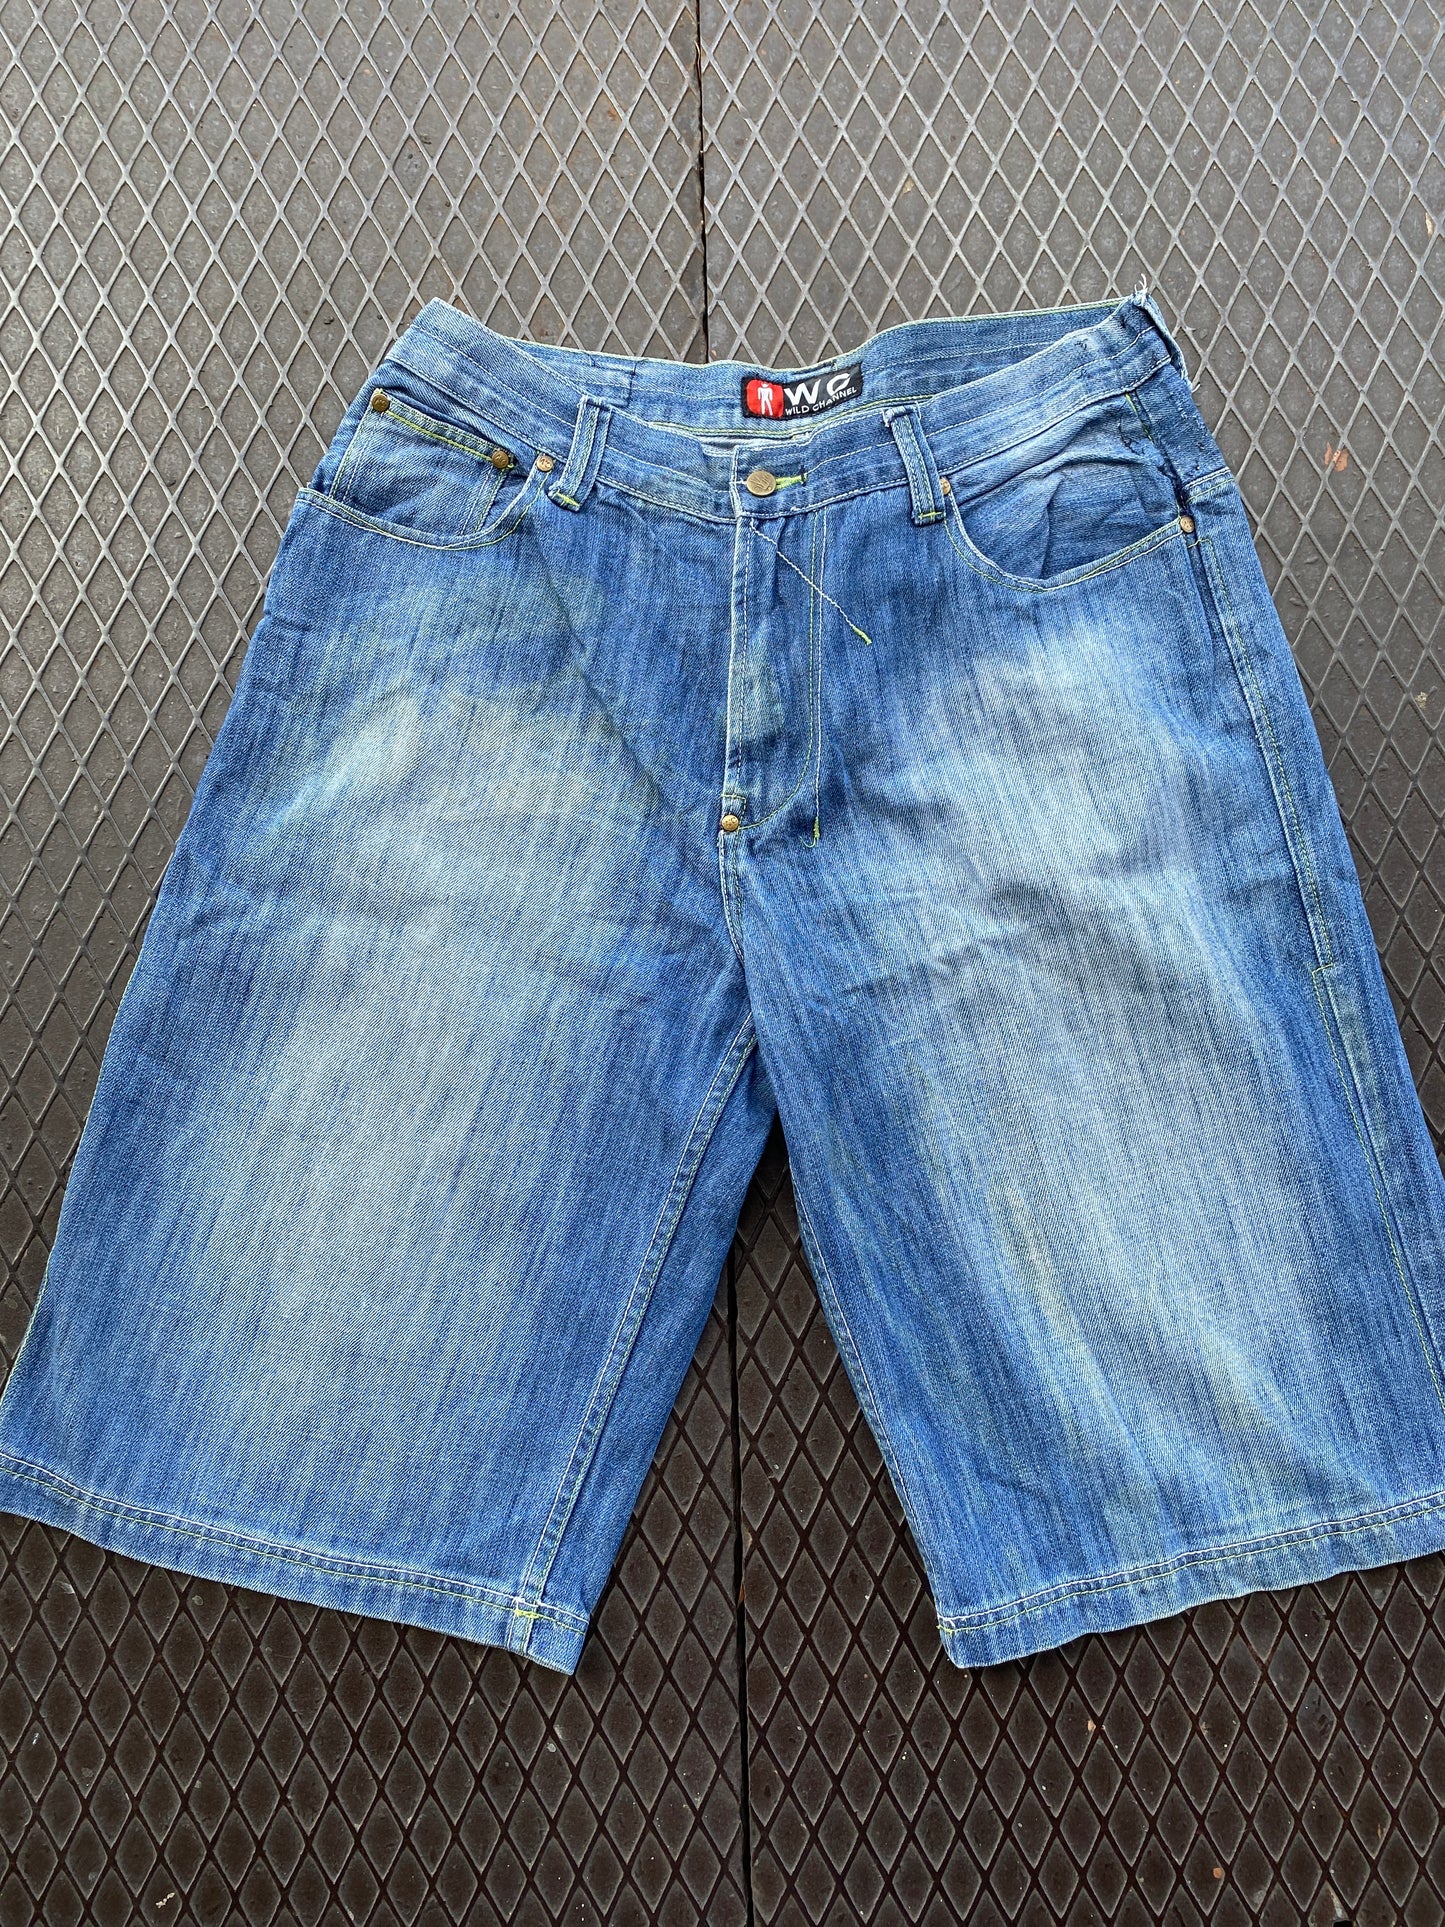 38 - Wild Channel "Out of this World" Blue Denim Shorts